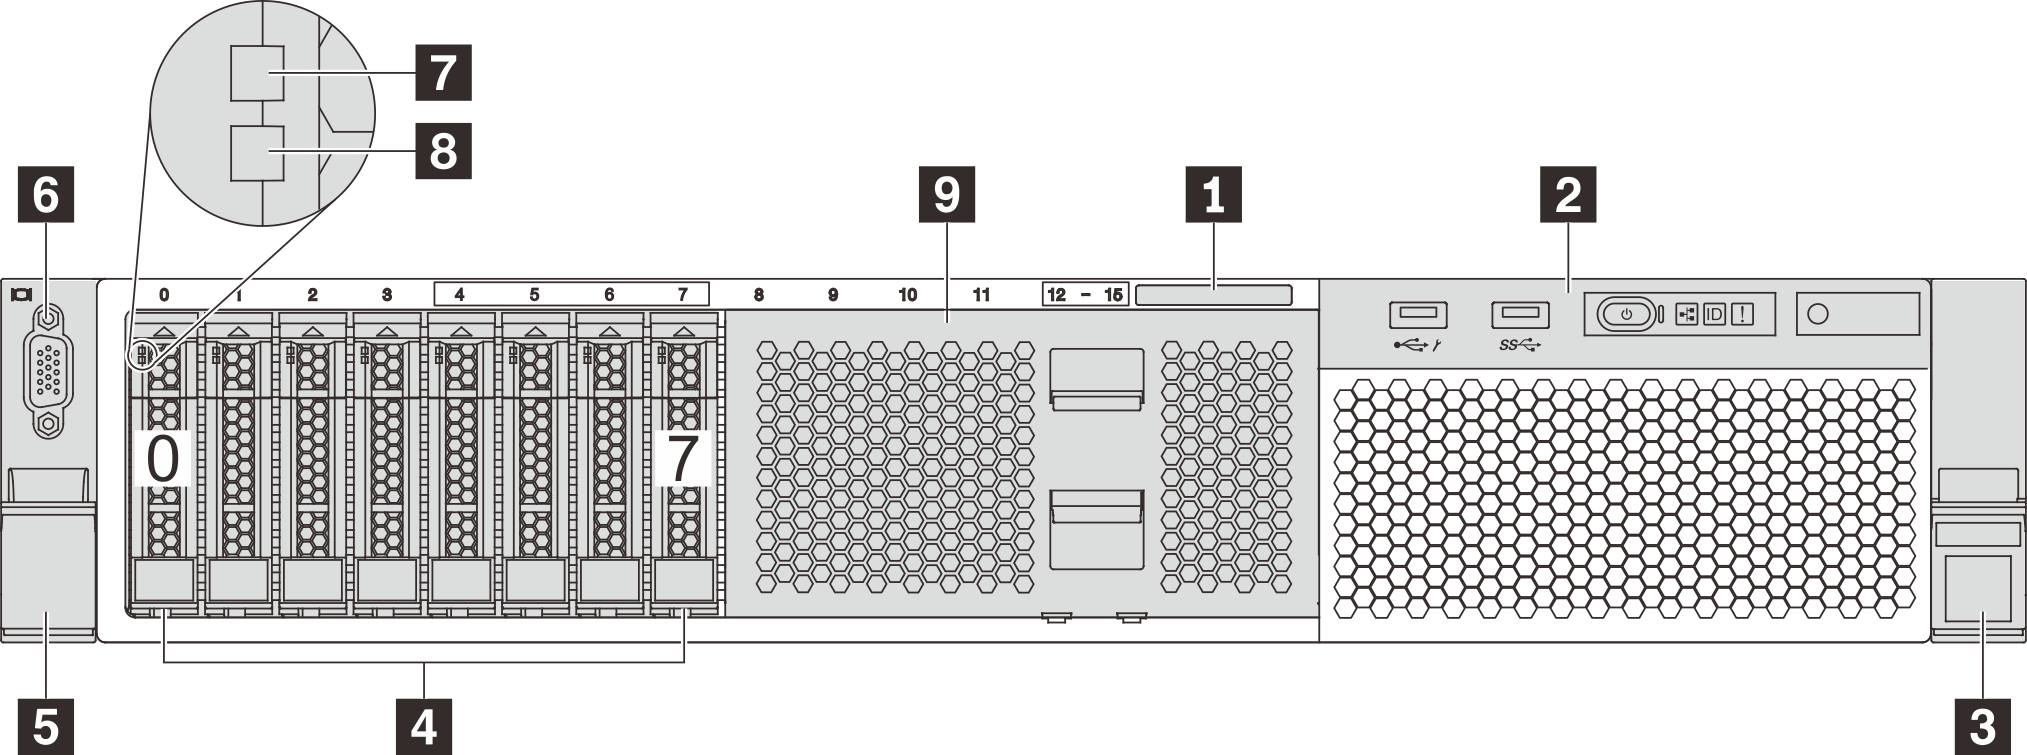 Front view of server models with eight 2.5-inch drive bays (0–7)